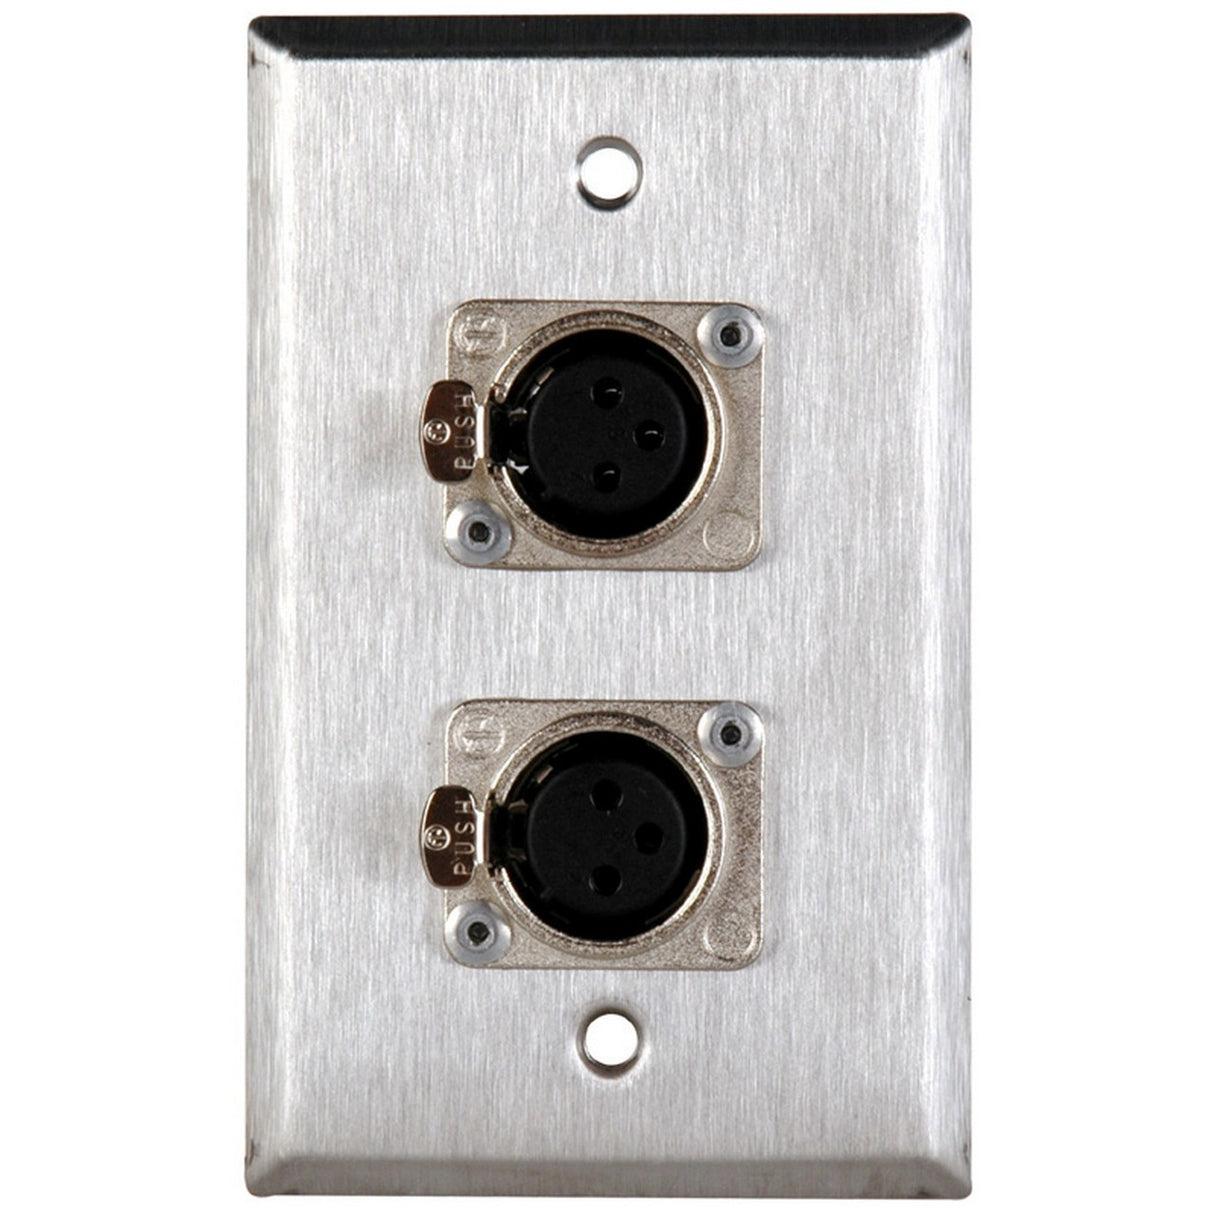 TecNec WPL-1116 | 3 Pin XLR Female 1 Gang Wall Plate Stainless Steel